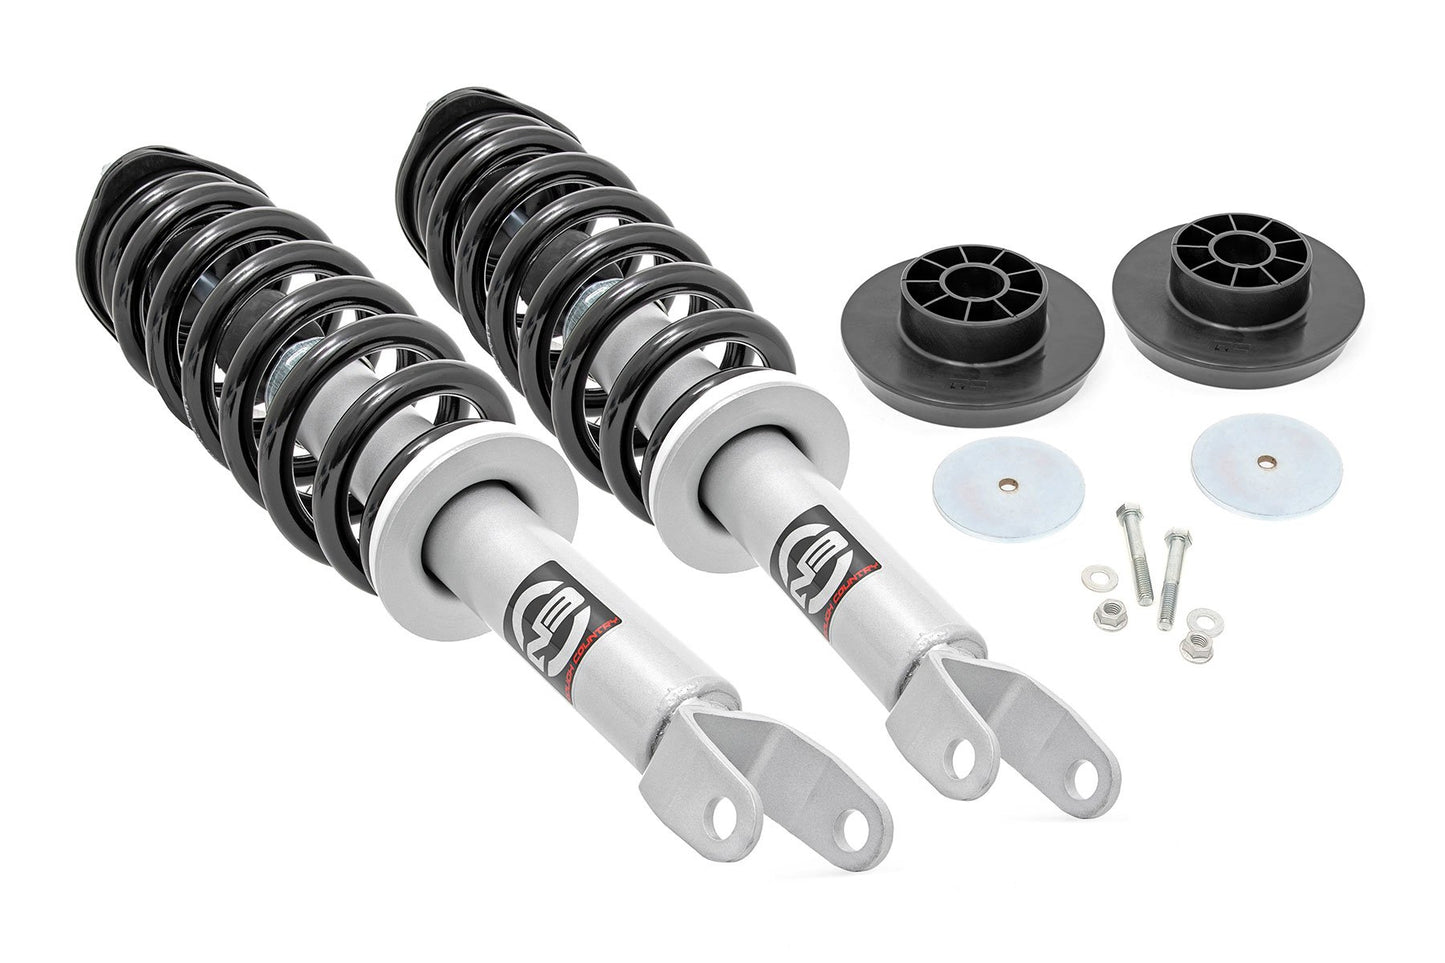 Rough Country (358.23) 2 Inch Lift Kit | N3 Struts | Ram 1500 4WD (2012-2018 & Classic)